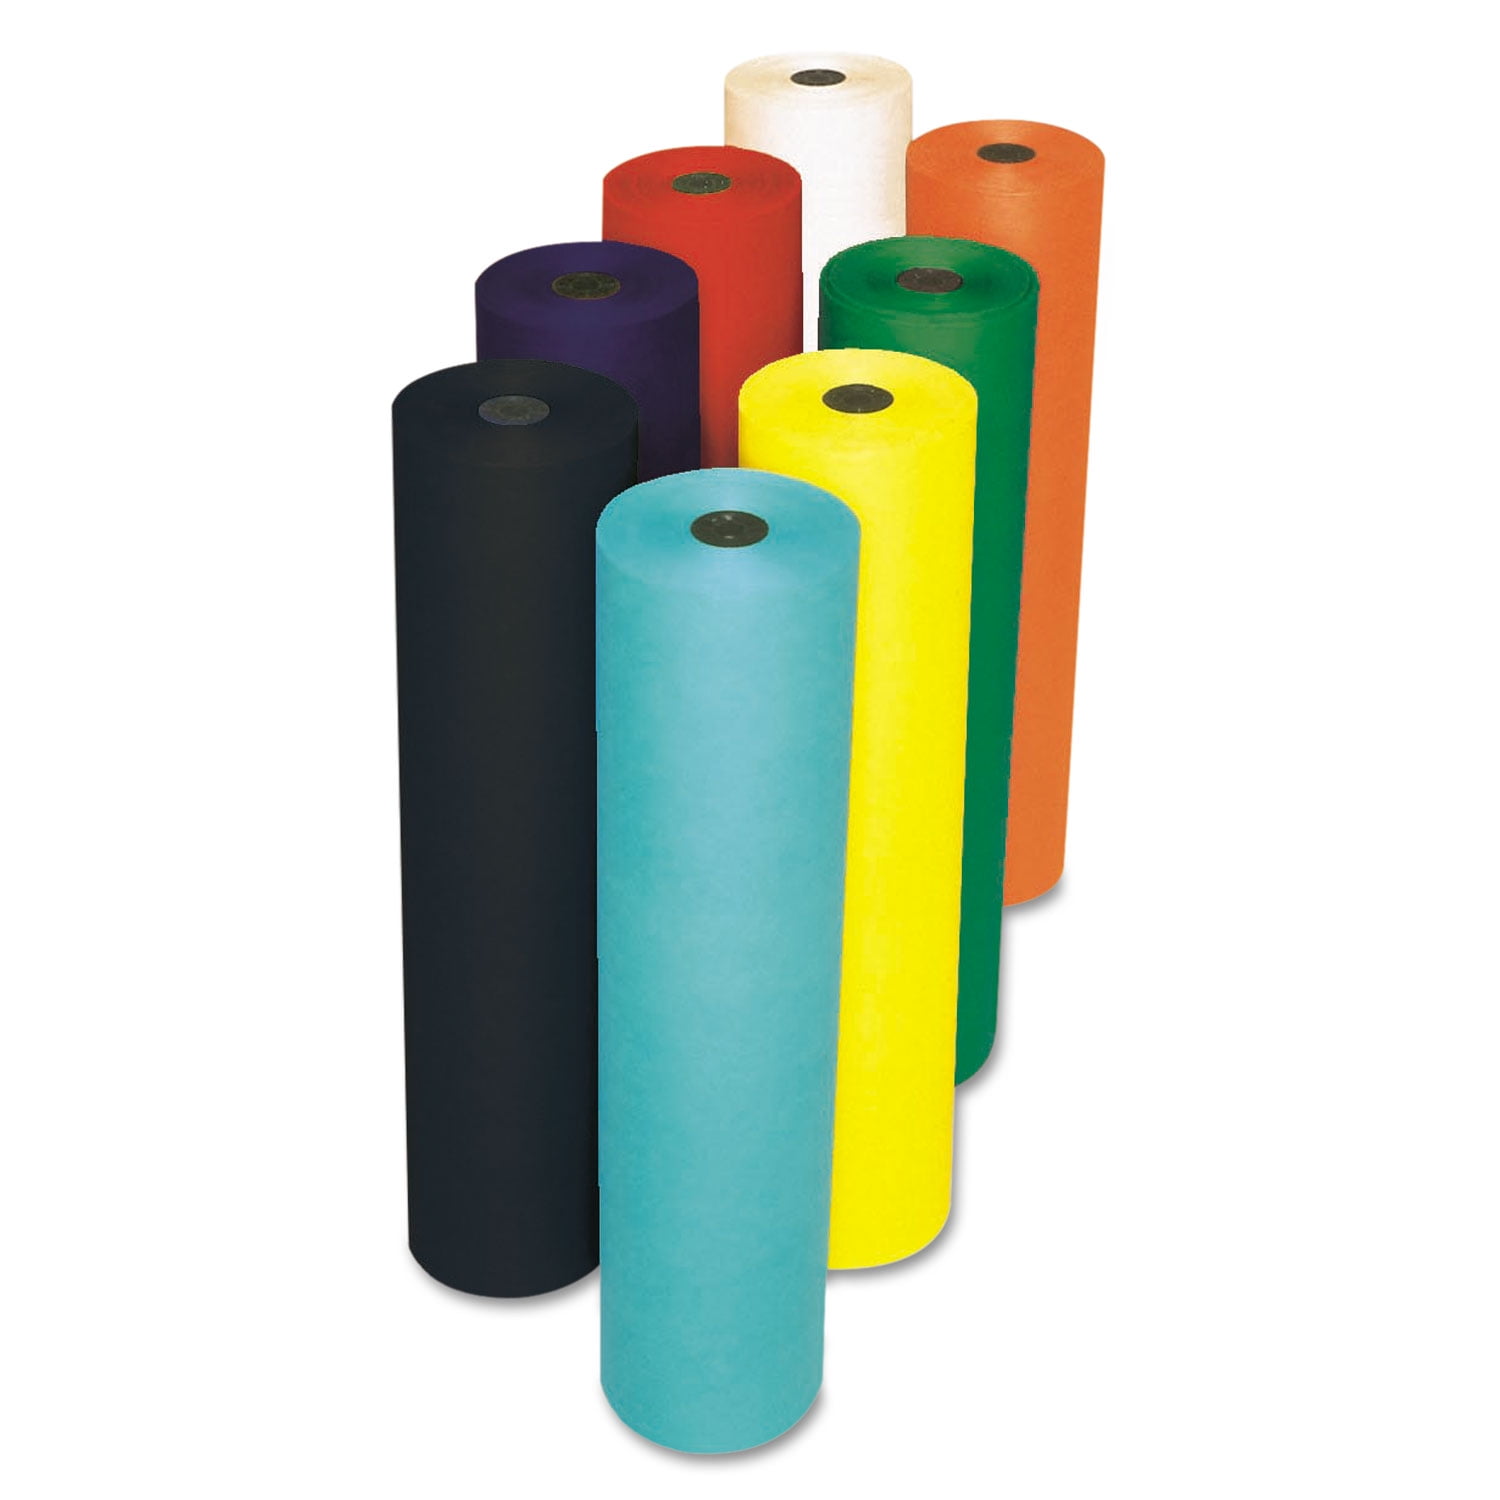 Duo-Finish® Butcher Paper Rolls at Lakeshore Learning